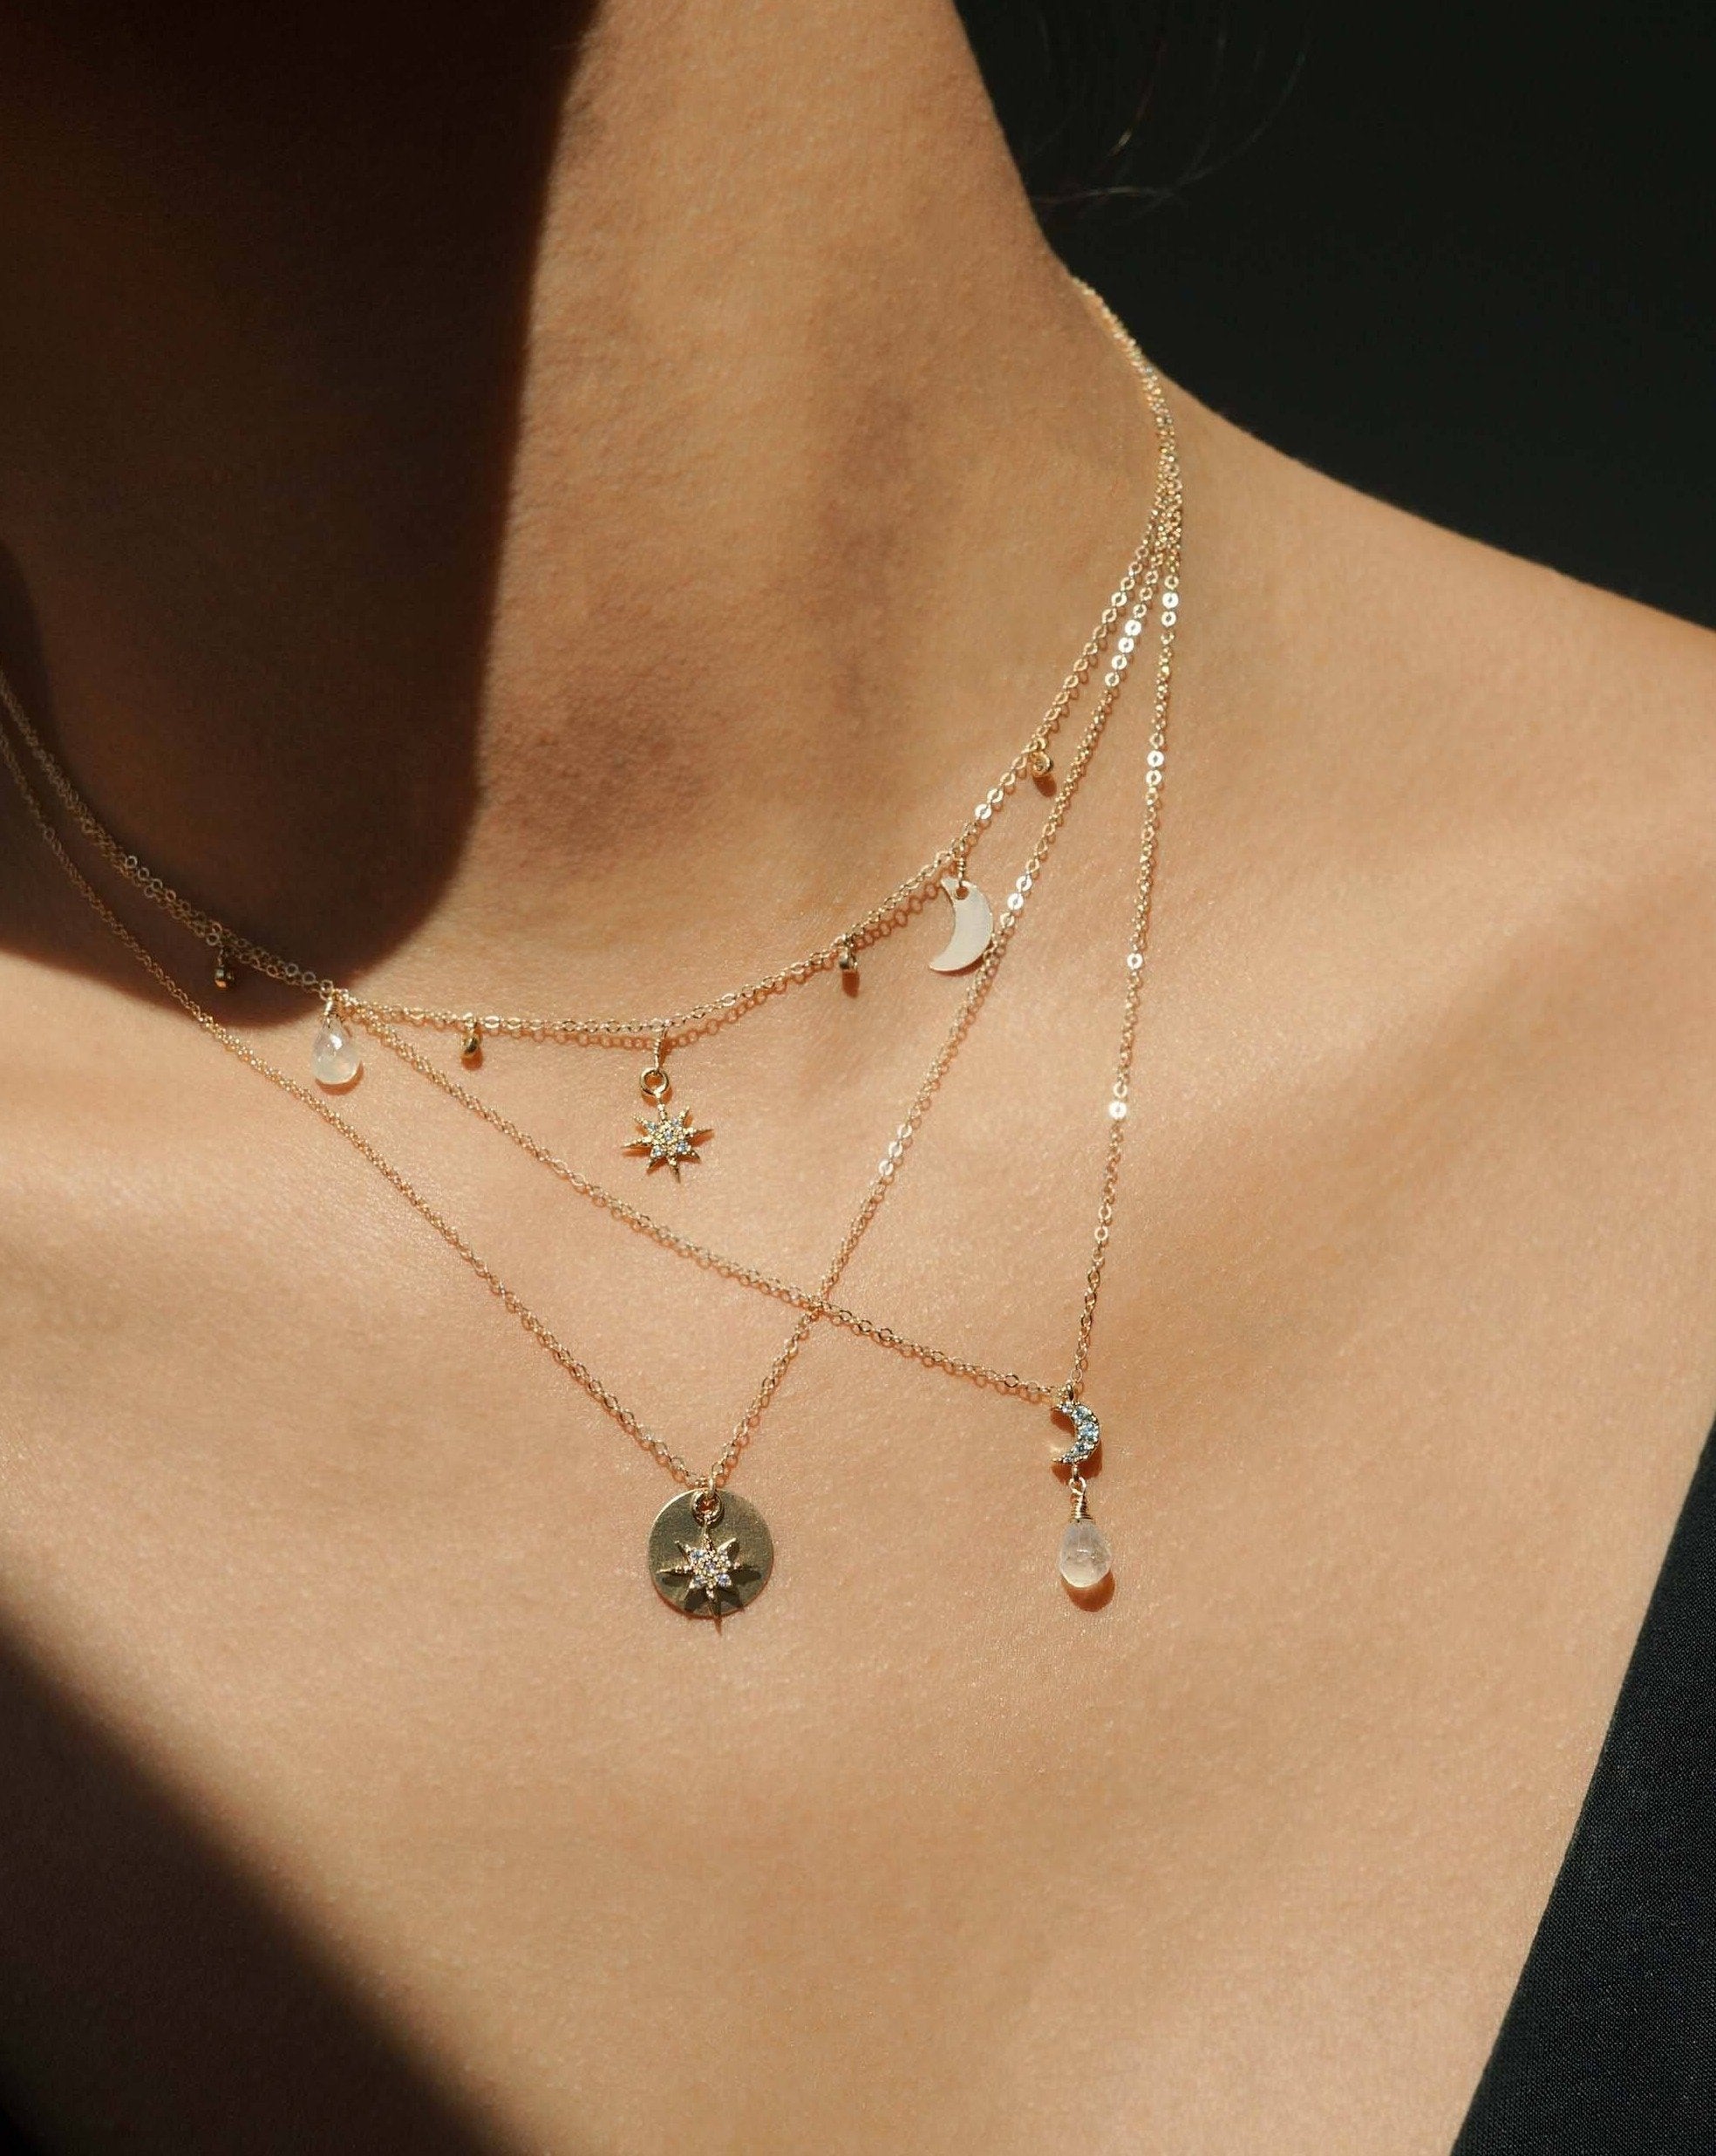 Adeena Necklace by KOZAKH. A 16 to 18 inch adjustable length necklace in 14K Gold Filled, featuring a coin charm and a Cubic Zirconia star charm.